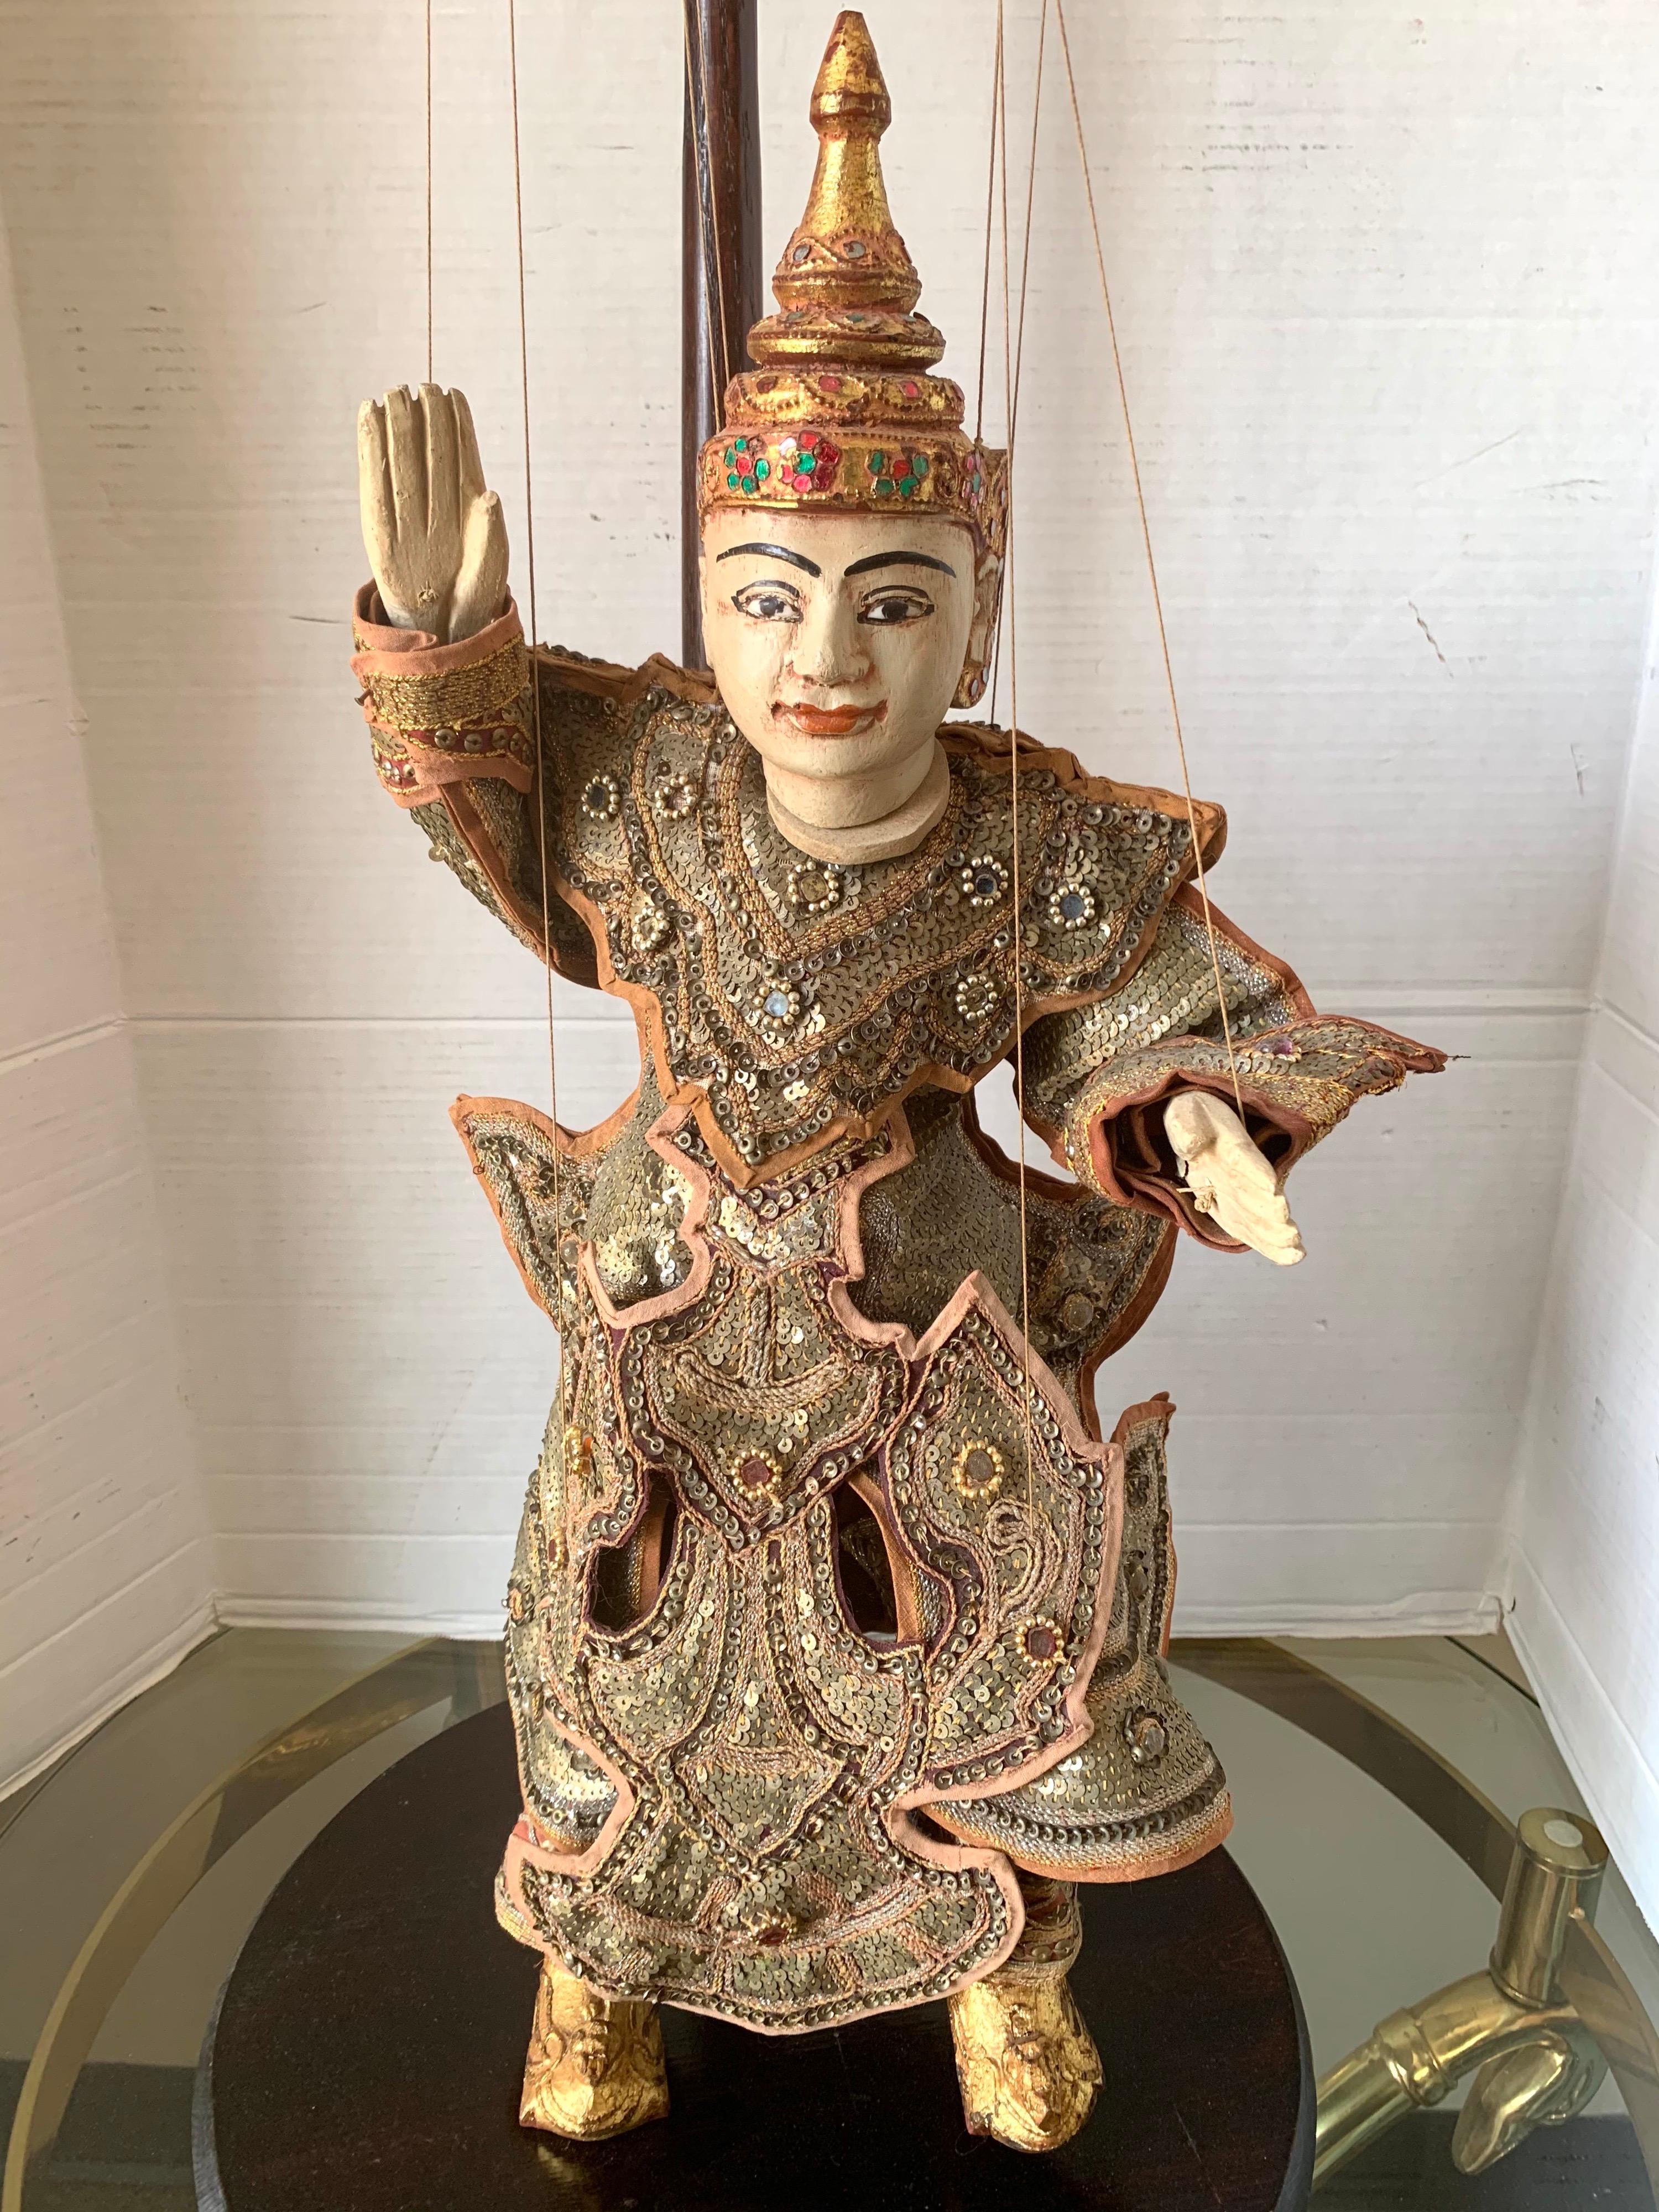 Stunning authentic Burmese ornately hand crafted Diety marionette puppet on display stand. The piece measures 23